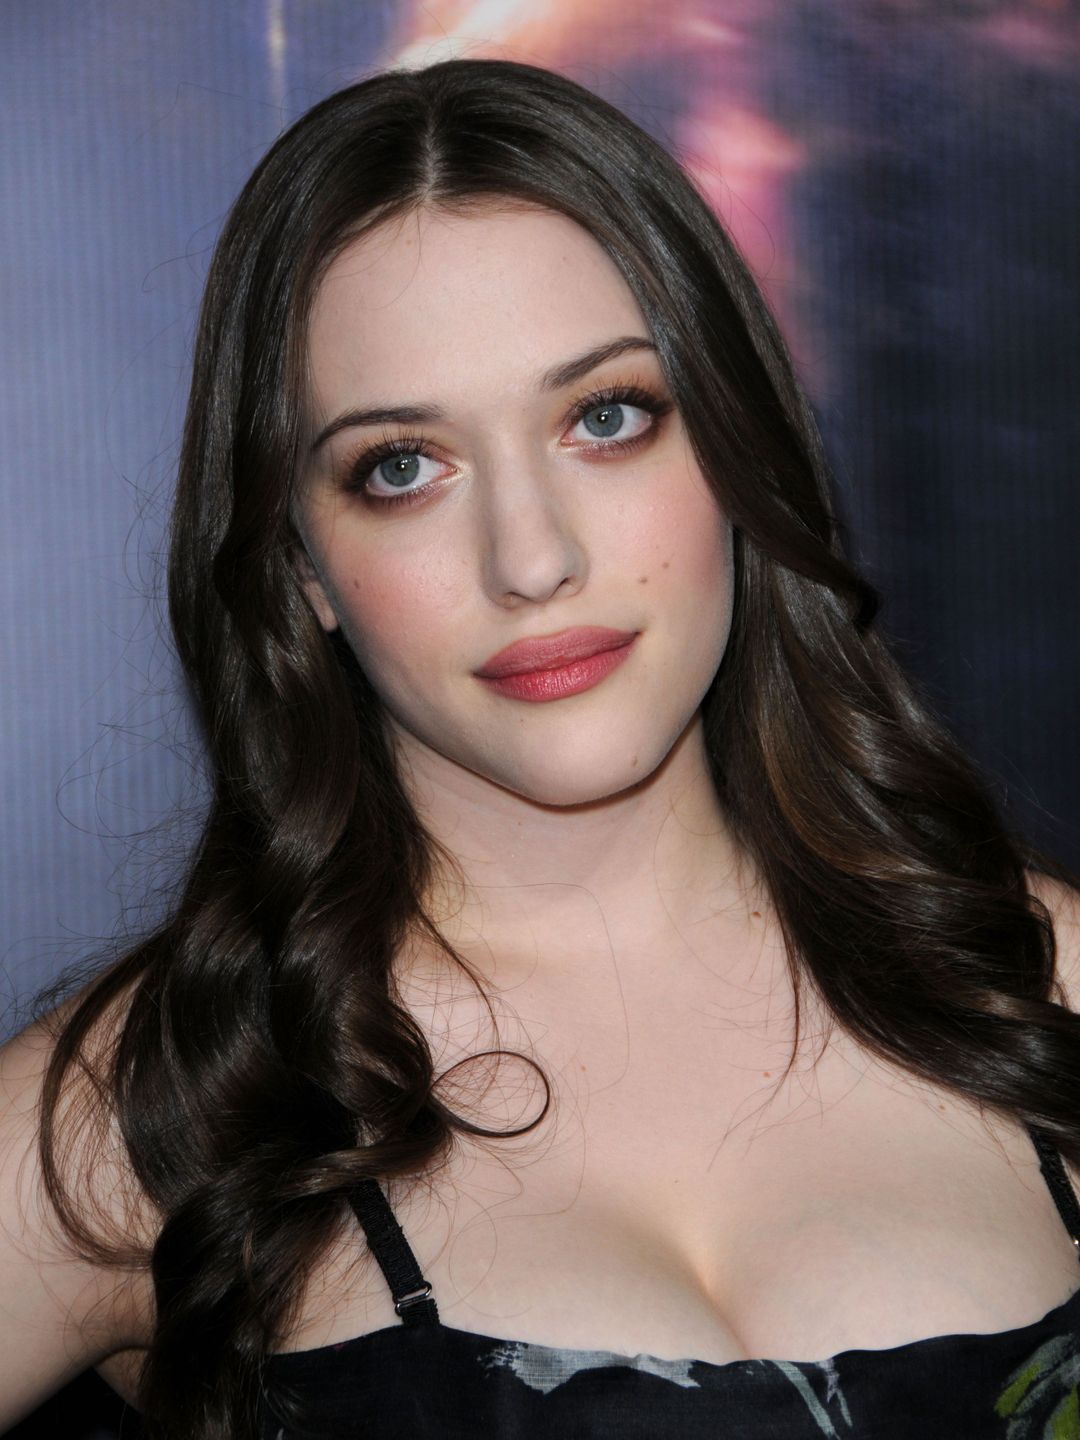 Kat Dennings where is she now